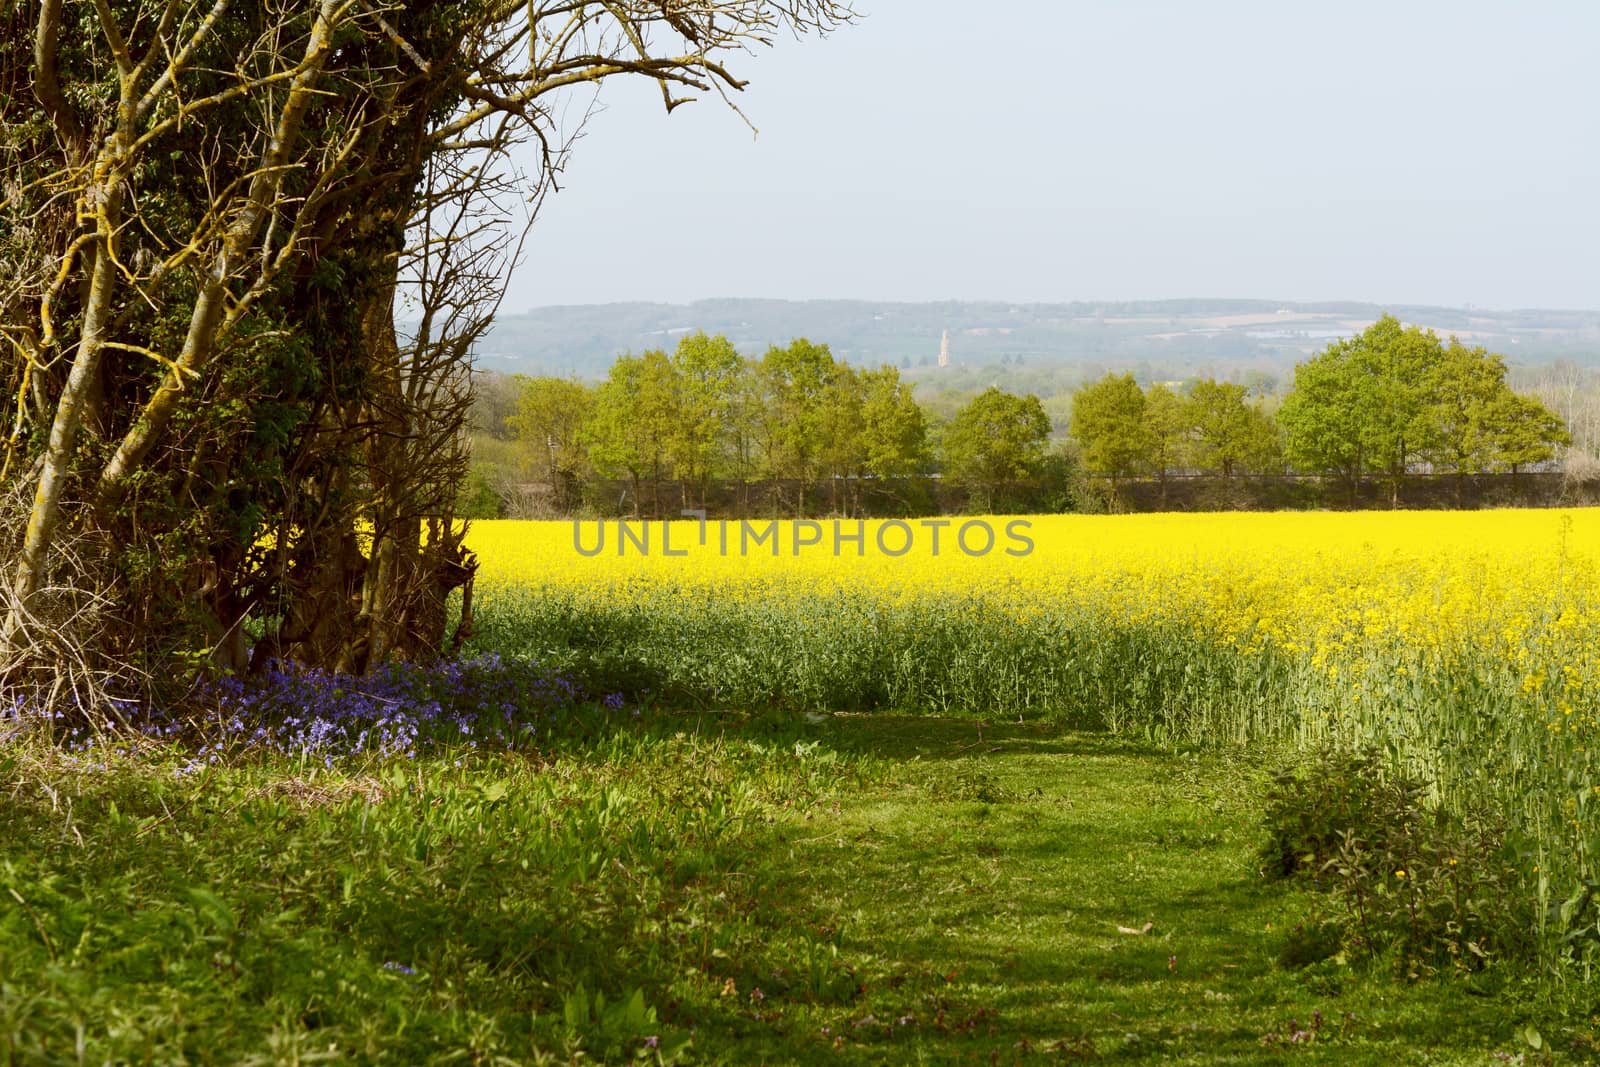 Bluebells grow at the edge of a field of oilseed rape. Beyond the tree line, Hadlow Tower can be seen in the rural English landscape.